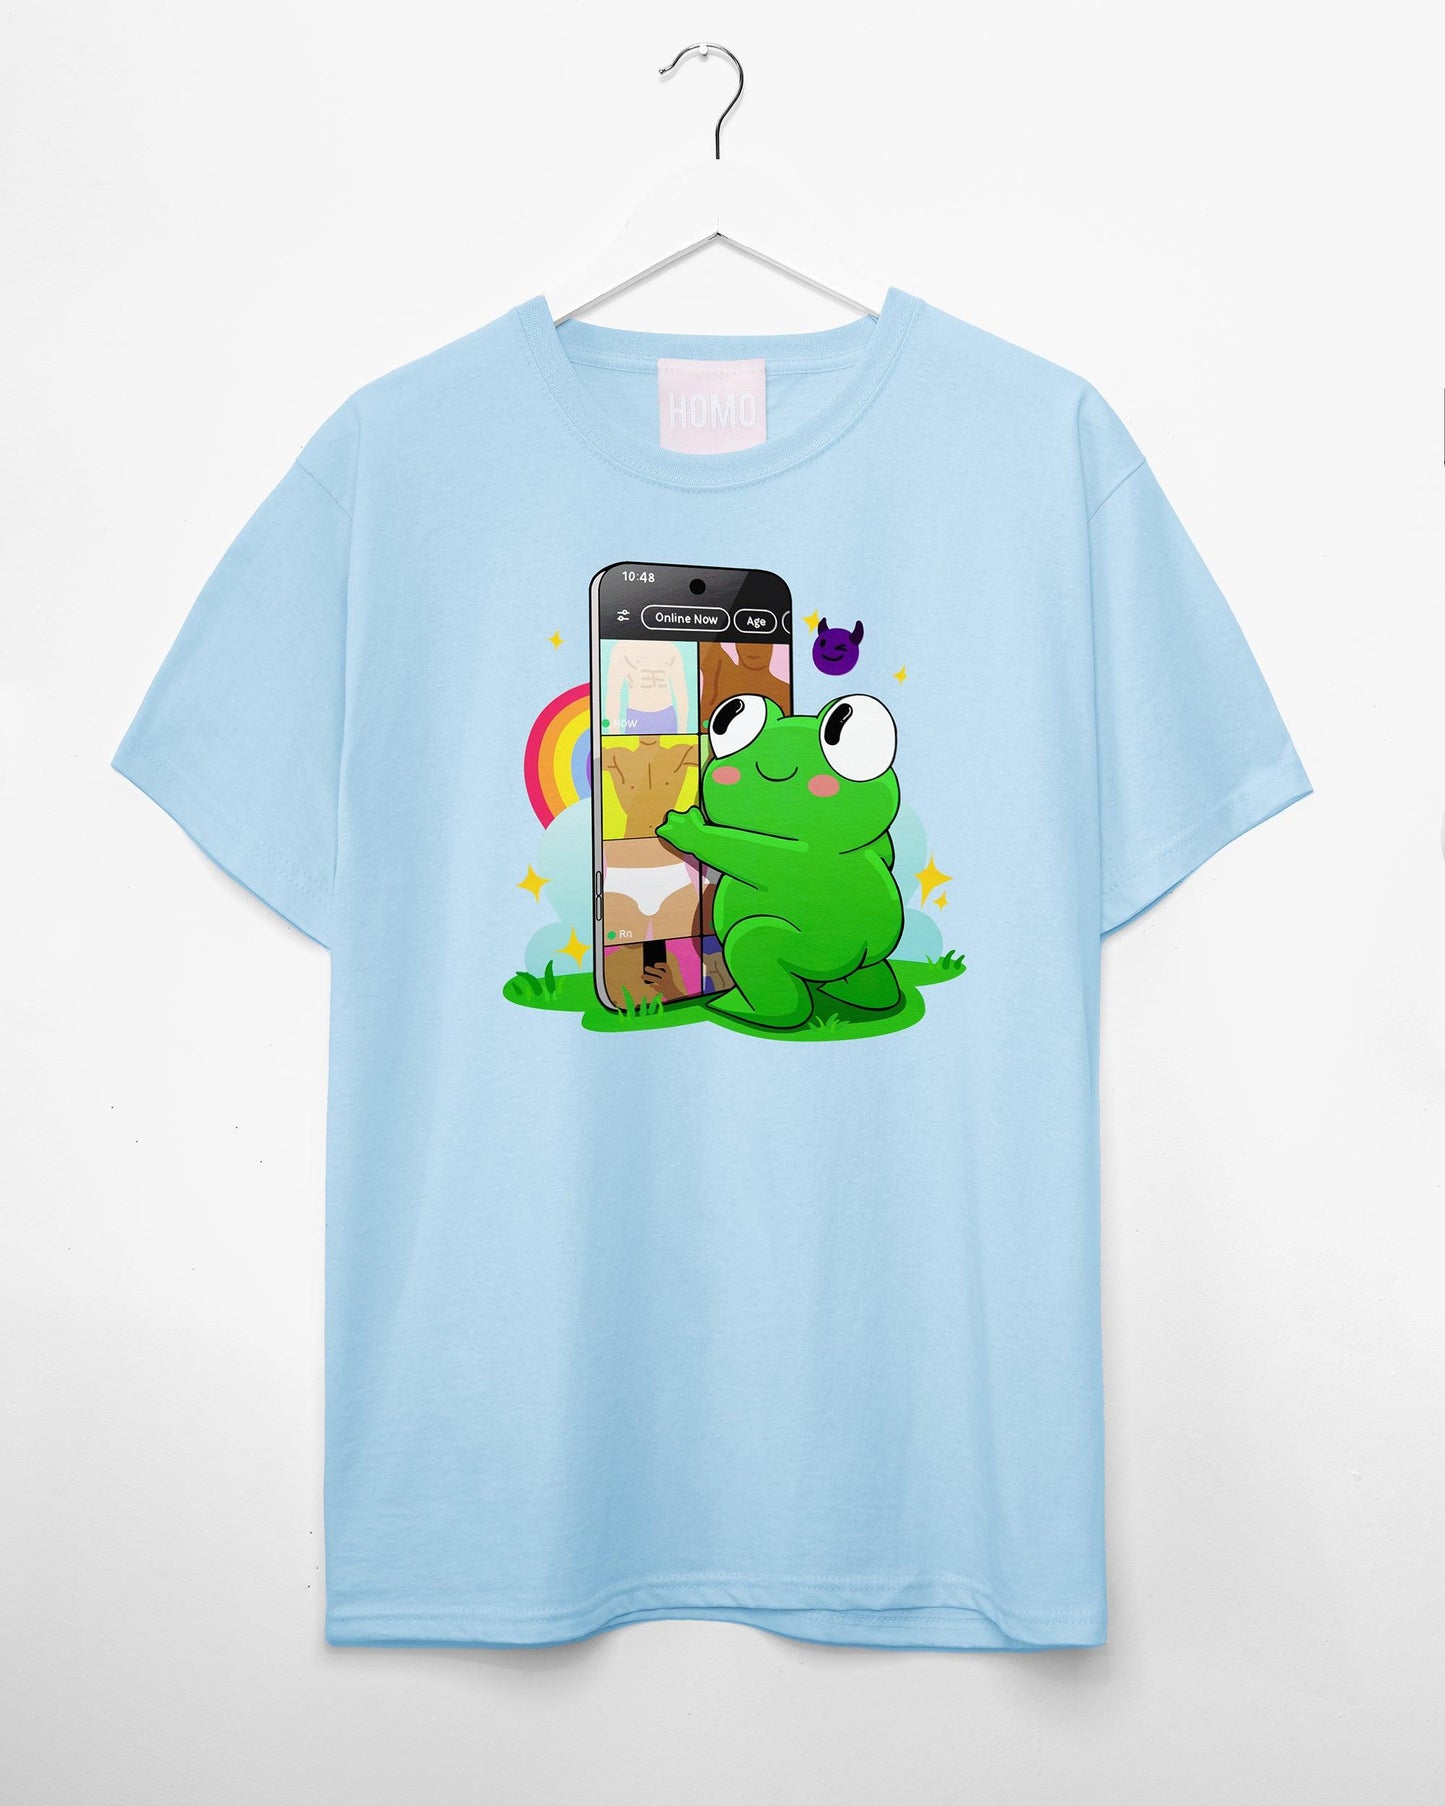 Introducing Pongy: Your Playful Dating App Addict on blue tshirt - HOMOLONDON